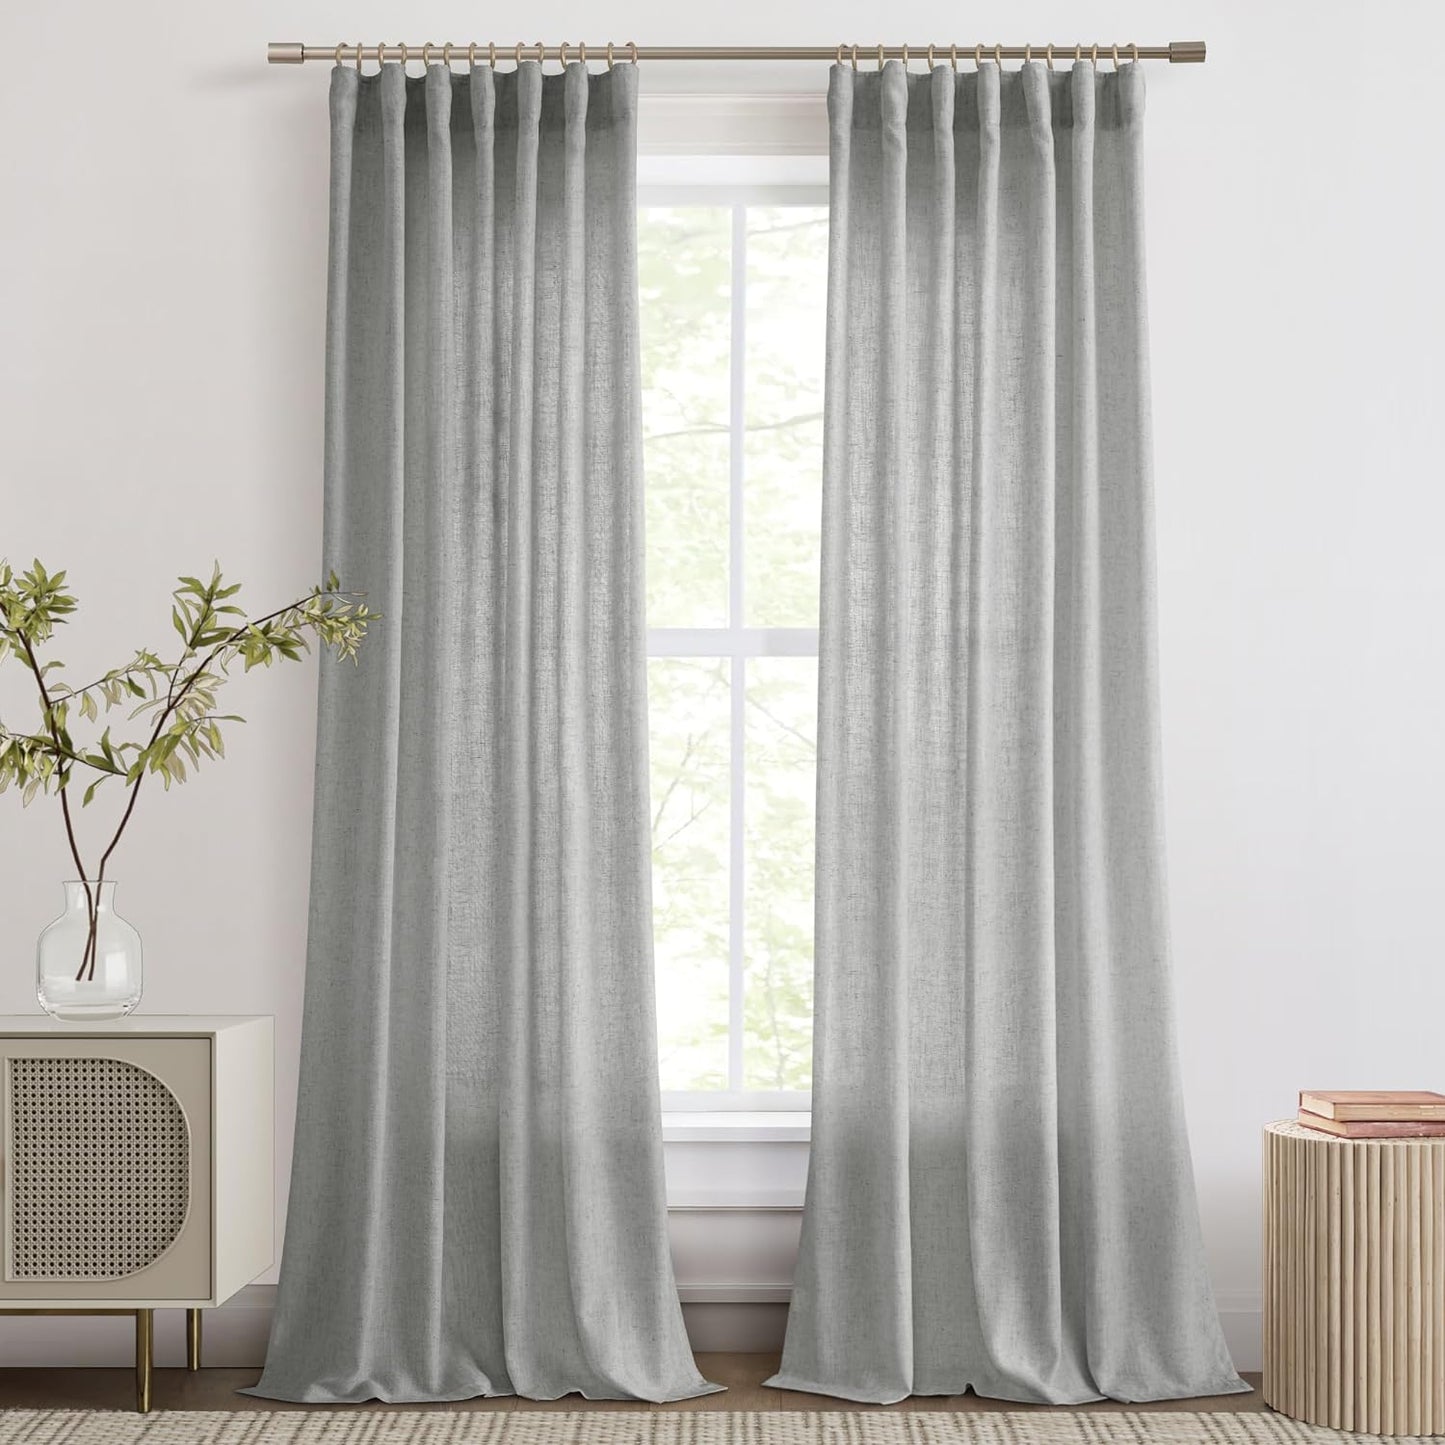 Joywell Natural Linen Cream Curtains 84 Inches Long for Living Room Bedroom Hook Belt Back Tab Pinch Pleated Light Filtering Ivory White Neutral Boho Modern Farmhouse Linen Drapes 84 Length 2 Panels  Joywell Grey 52W X 96L Inch X 2 Panels 